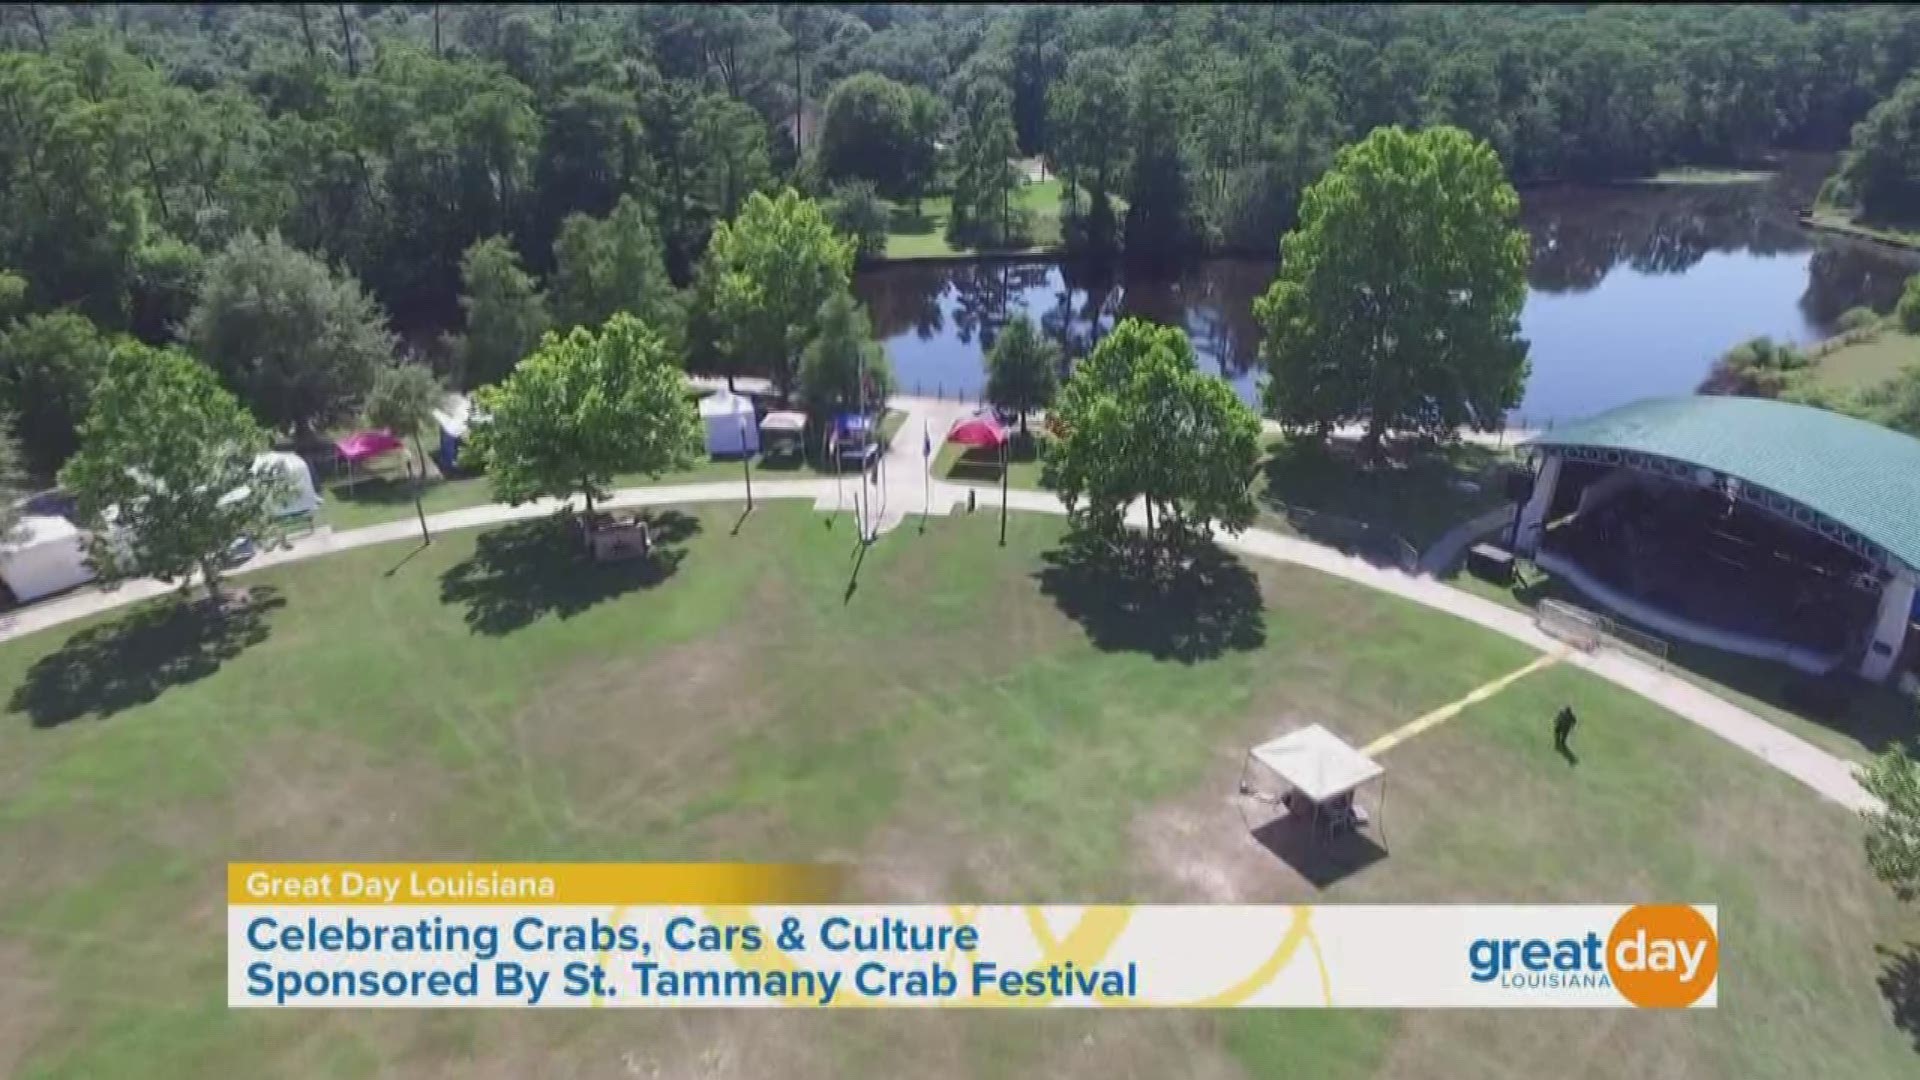 The St. Tammany Crab Fest is back in Slidell Heritage Park starting September 20th-September 22nd. This fest will bring top-notch entertainment, wholesome family fun and of course, tons of delicious Louisiana crabs. Join in on the fun and listen to live entertainment from bands like Paul Crosby of Saliva, Asleep in the Wake, Inner Image, Fremaux Ave Band and more! Admission is $25 and free for children 12 and under.